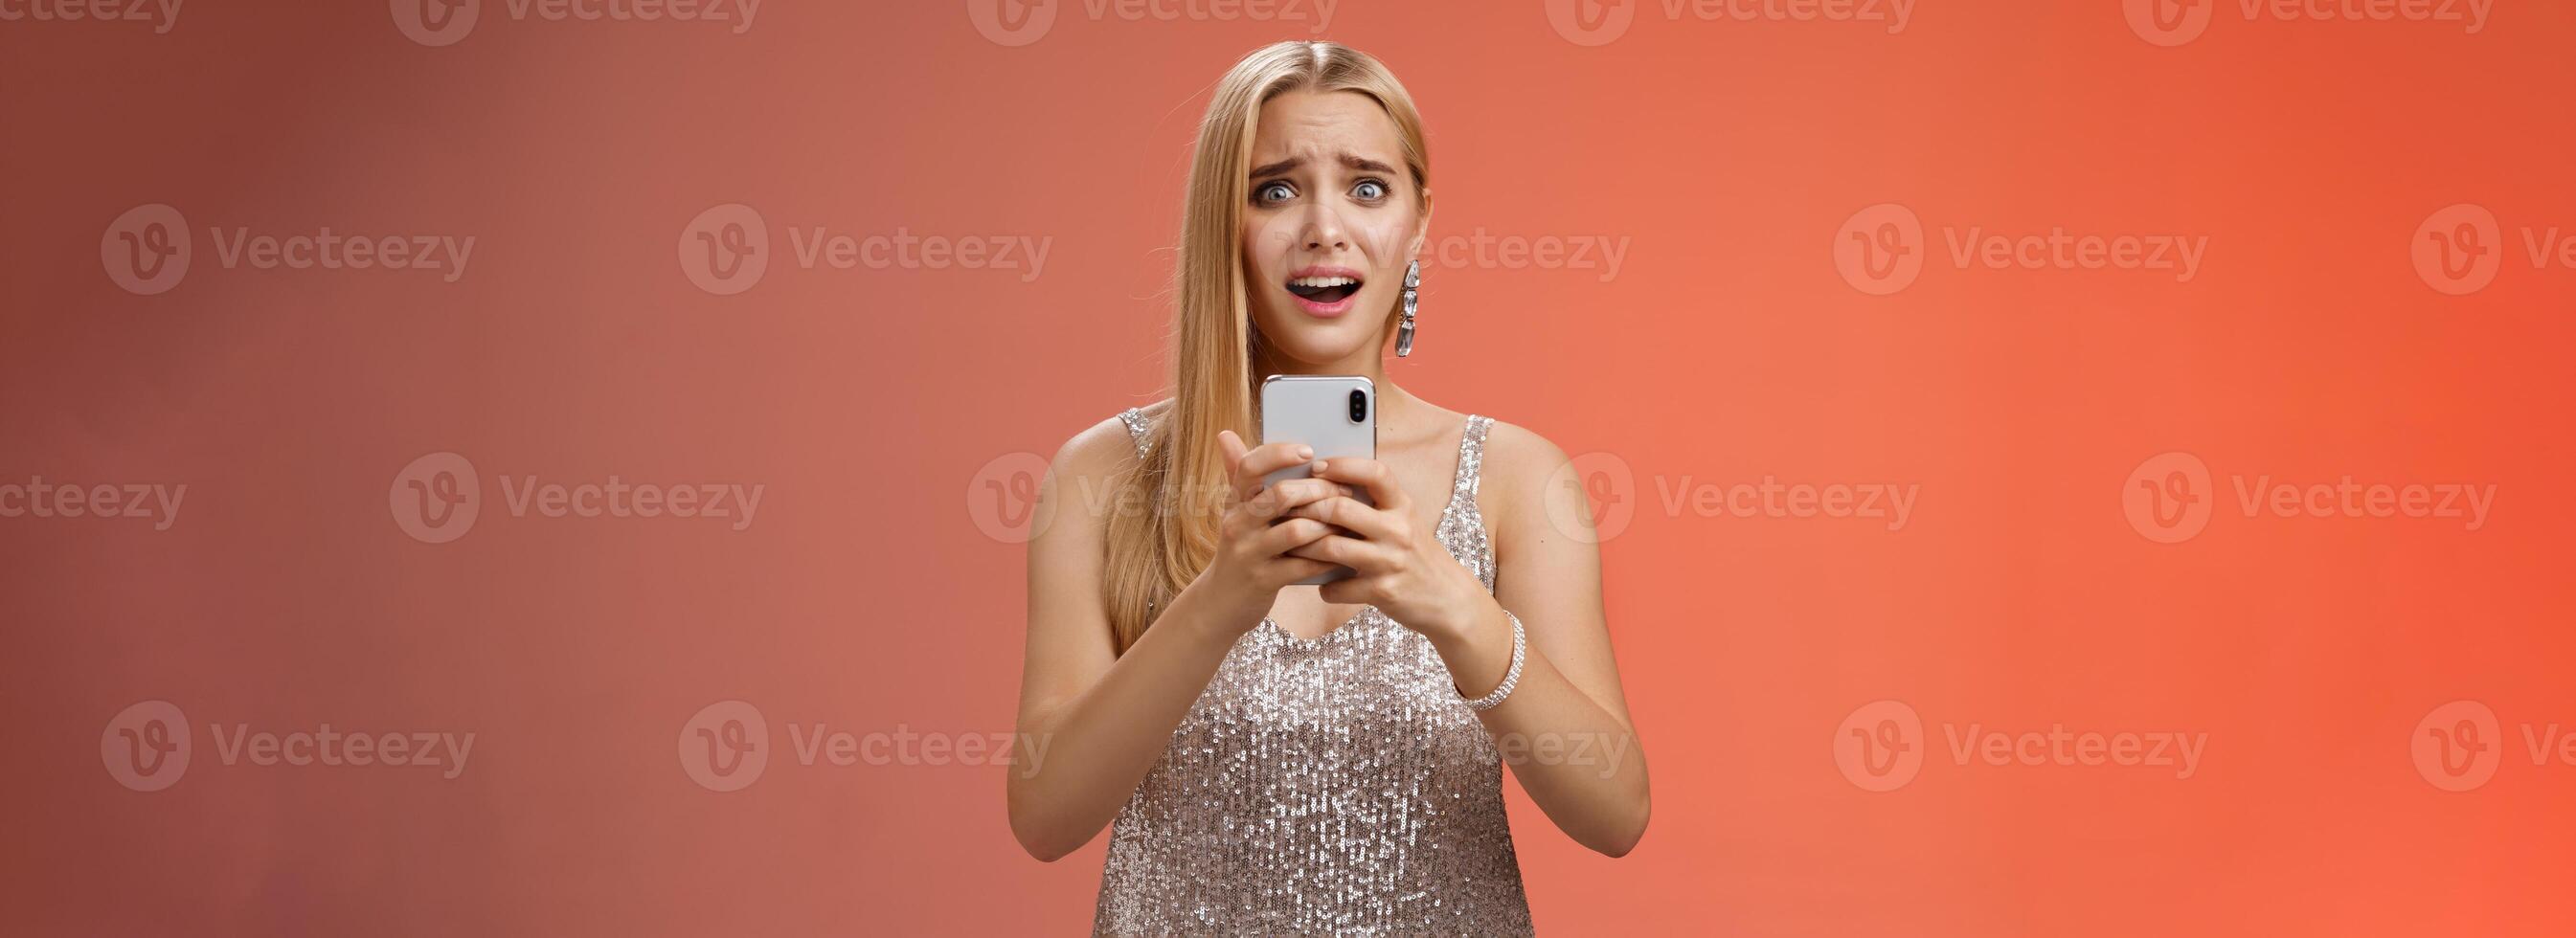 Panicking shocked woman concerned photos leaked internet look afraid anxious widen eyes cringing troubled hold smartphone shook speechless gasping terrified friends find out secret, red background